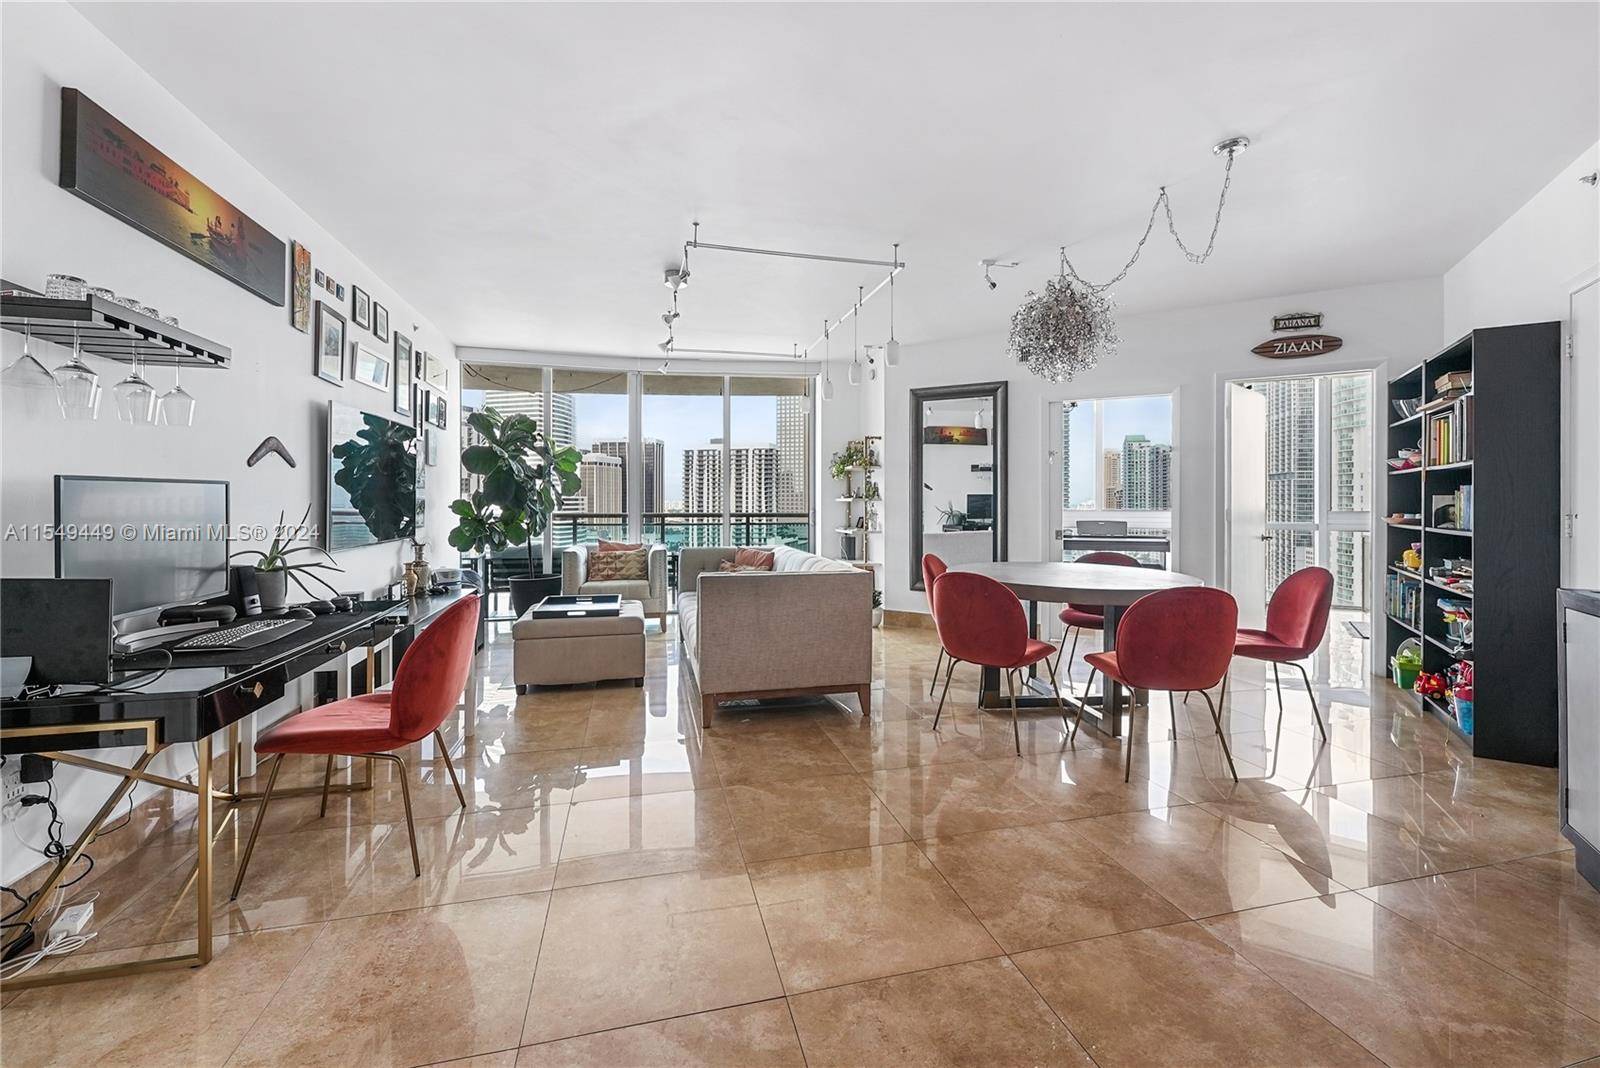 Fully upgraded Corner 3 bed 2 bath at Wind Riverfront, large balcony with beautiful panoramic views of Miami River, Brickell, city skyline and Biscayne Bay.